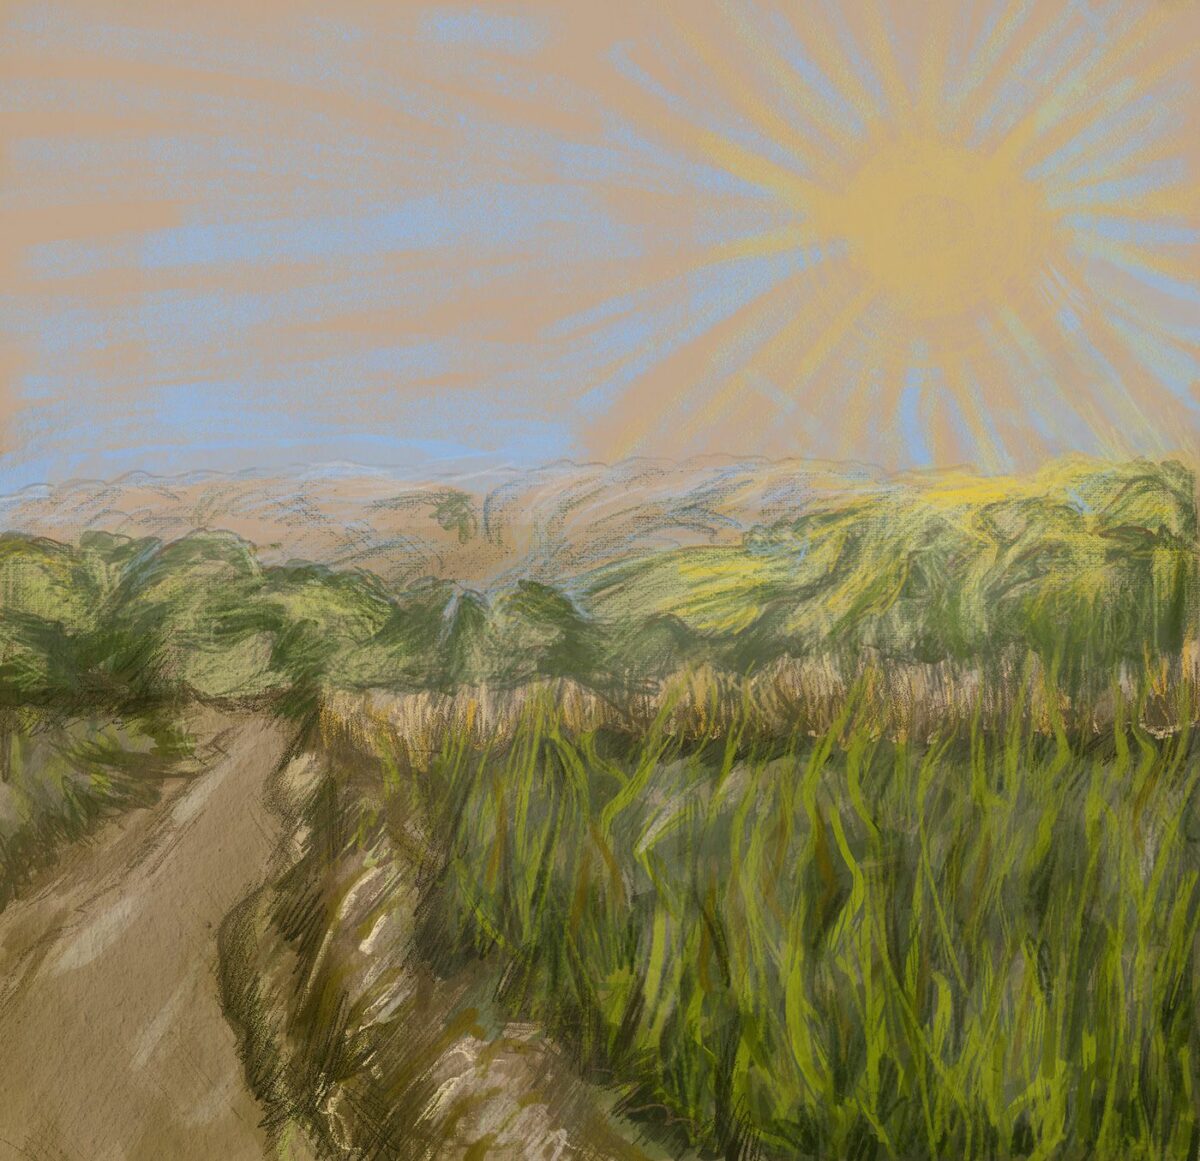 A Walk Through The Fields A Marvelous Digital Painting Series By Veronika Stehr 6